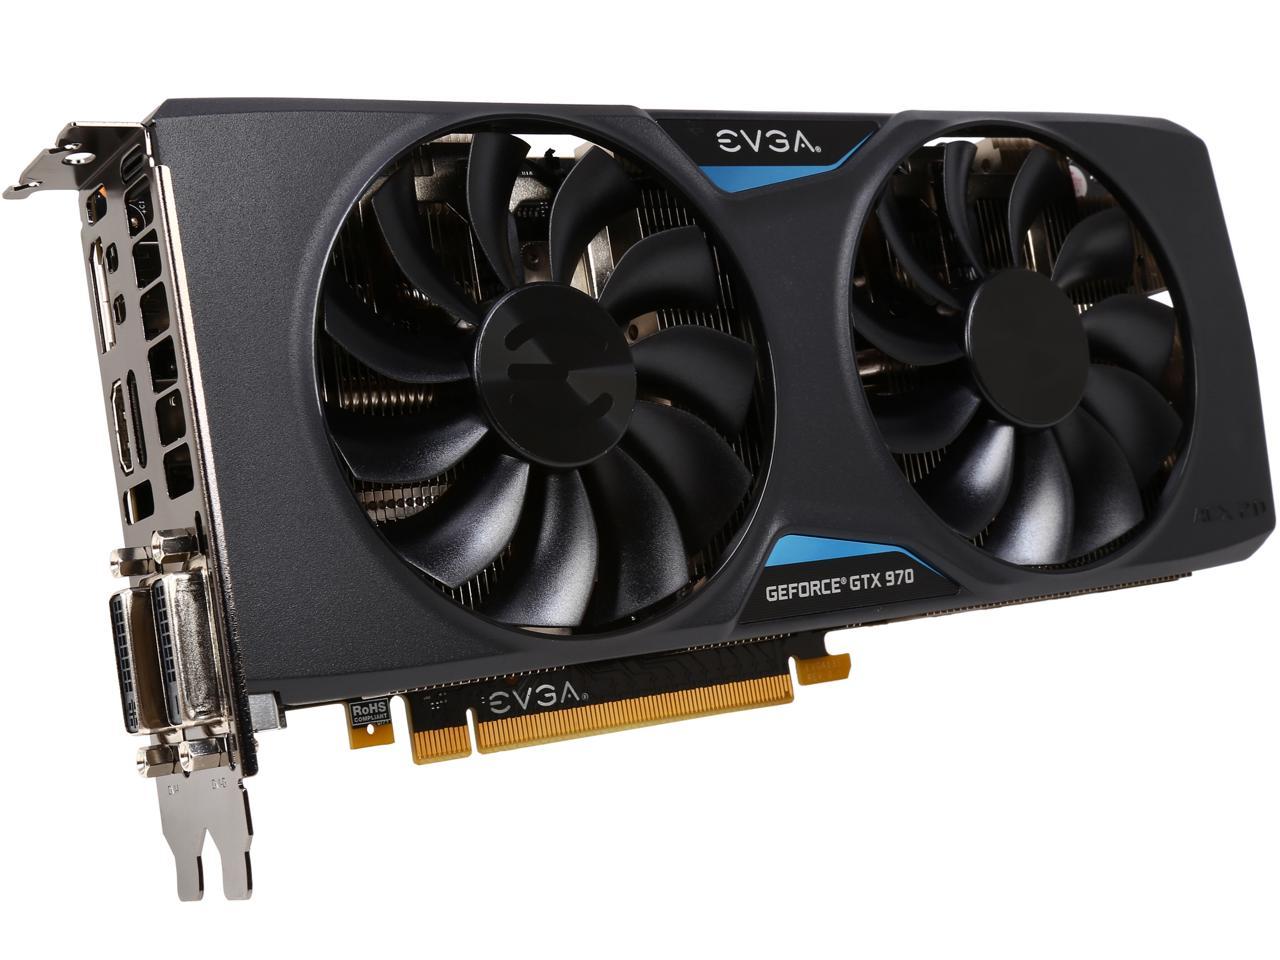 Evga Geforce Gtx 970 04g P4 2978 Kr 4gb Ftw Gaming W Acx 2 0 Silent Cooling Graphics Card Newegg Com